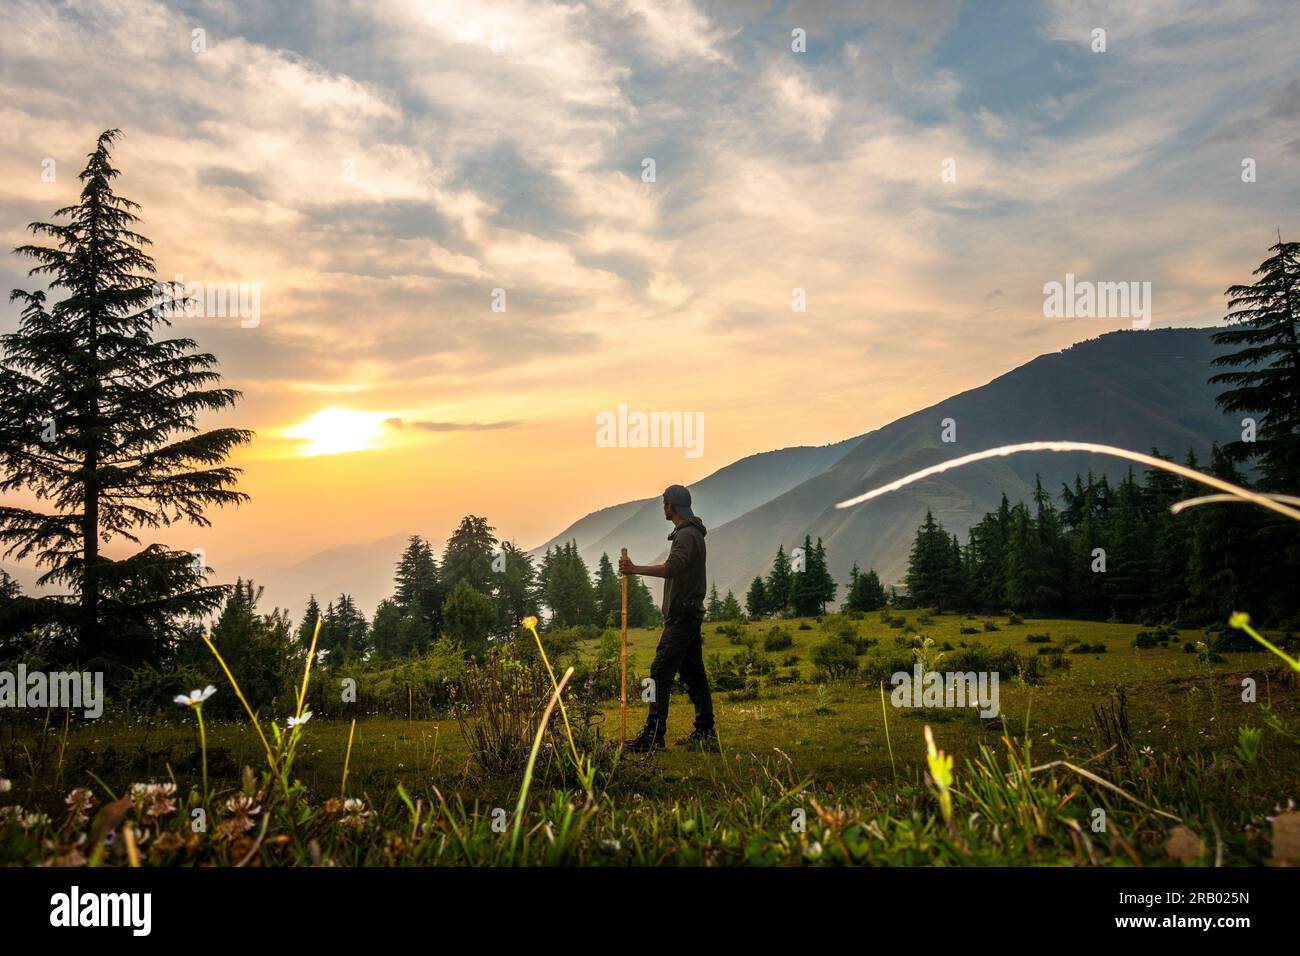 June 28th, 2023, Nagthat, Uttarakhand, India: Trekker with stick in meadow at sunset, embraced by mountain ridge and pine trees. Himalayas, Uttarakhan Stock Photo